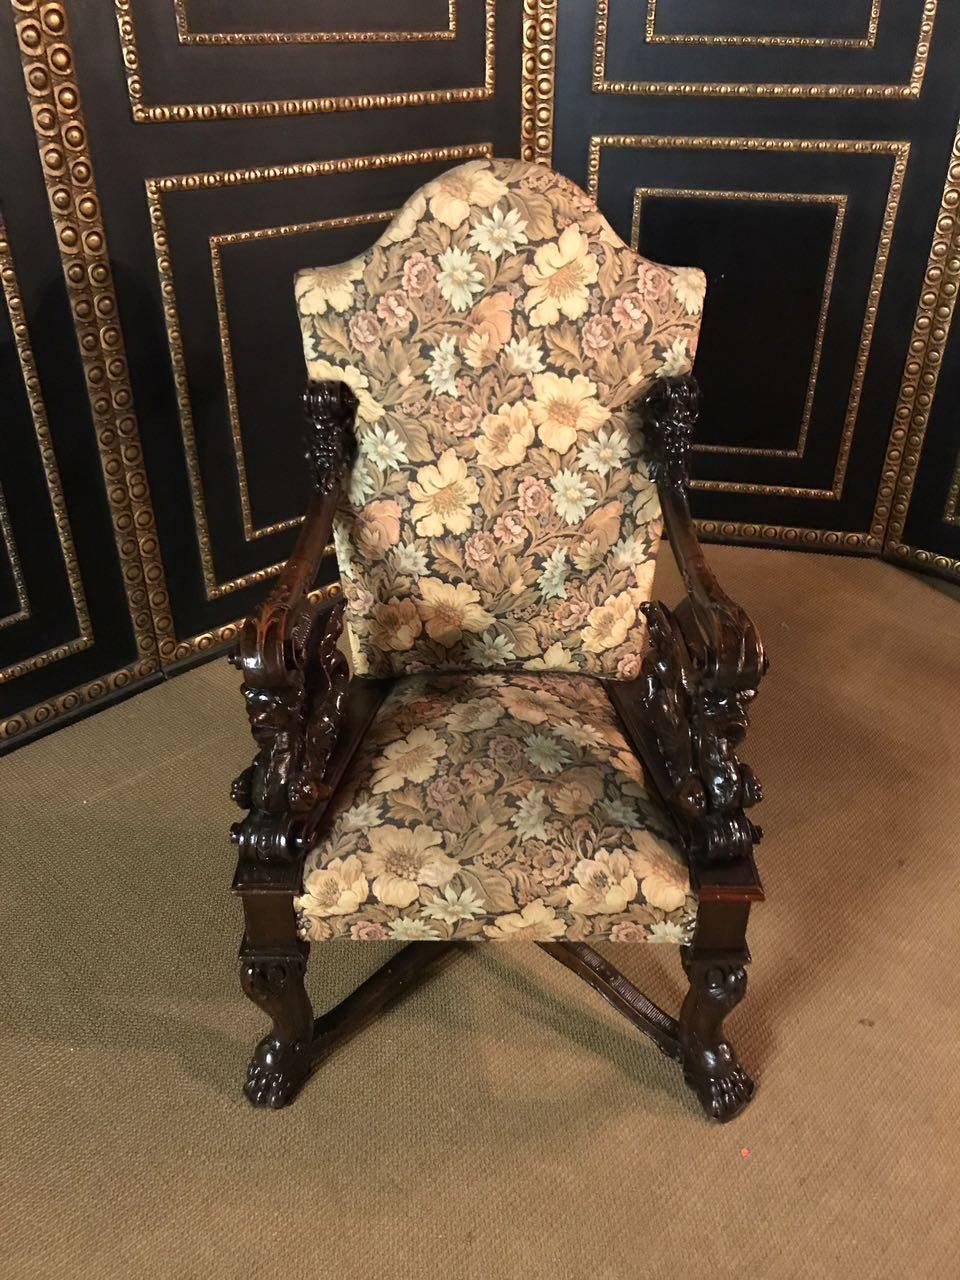 2 Figural Neo Renaissance Armchairs.
From former castle possession. Solid oak. Finished on four curving, carved legs in lion-heads. Complete with rich carvings, flanked by two full-carved armrests in the form of chimera. Seat and back upholstered